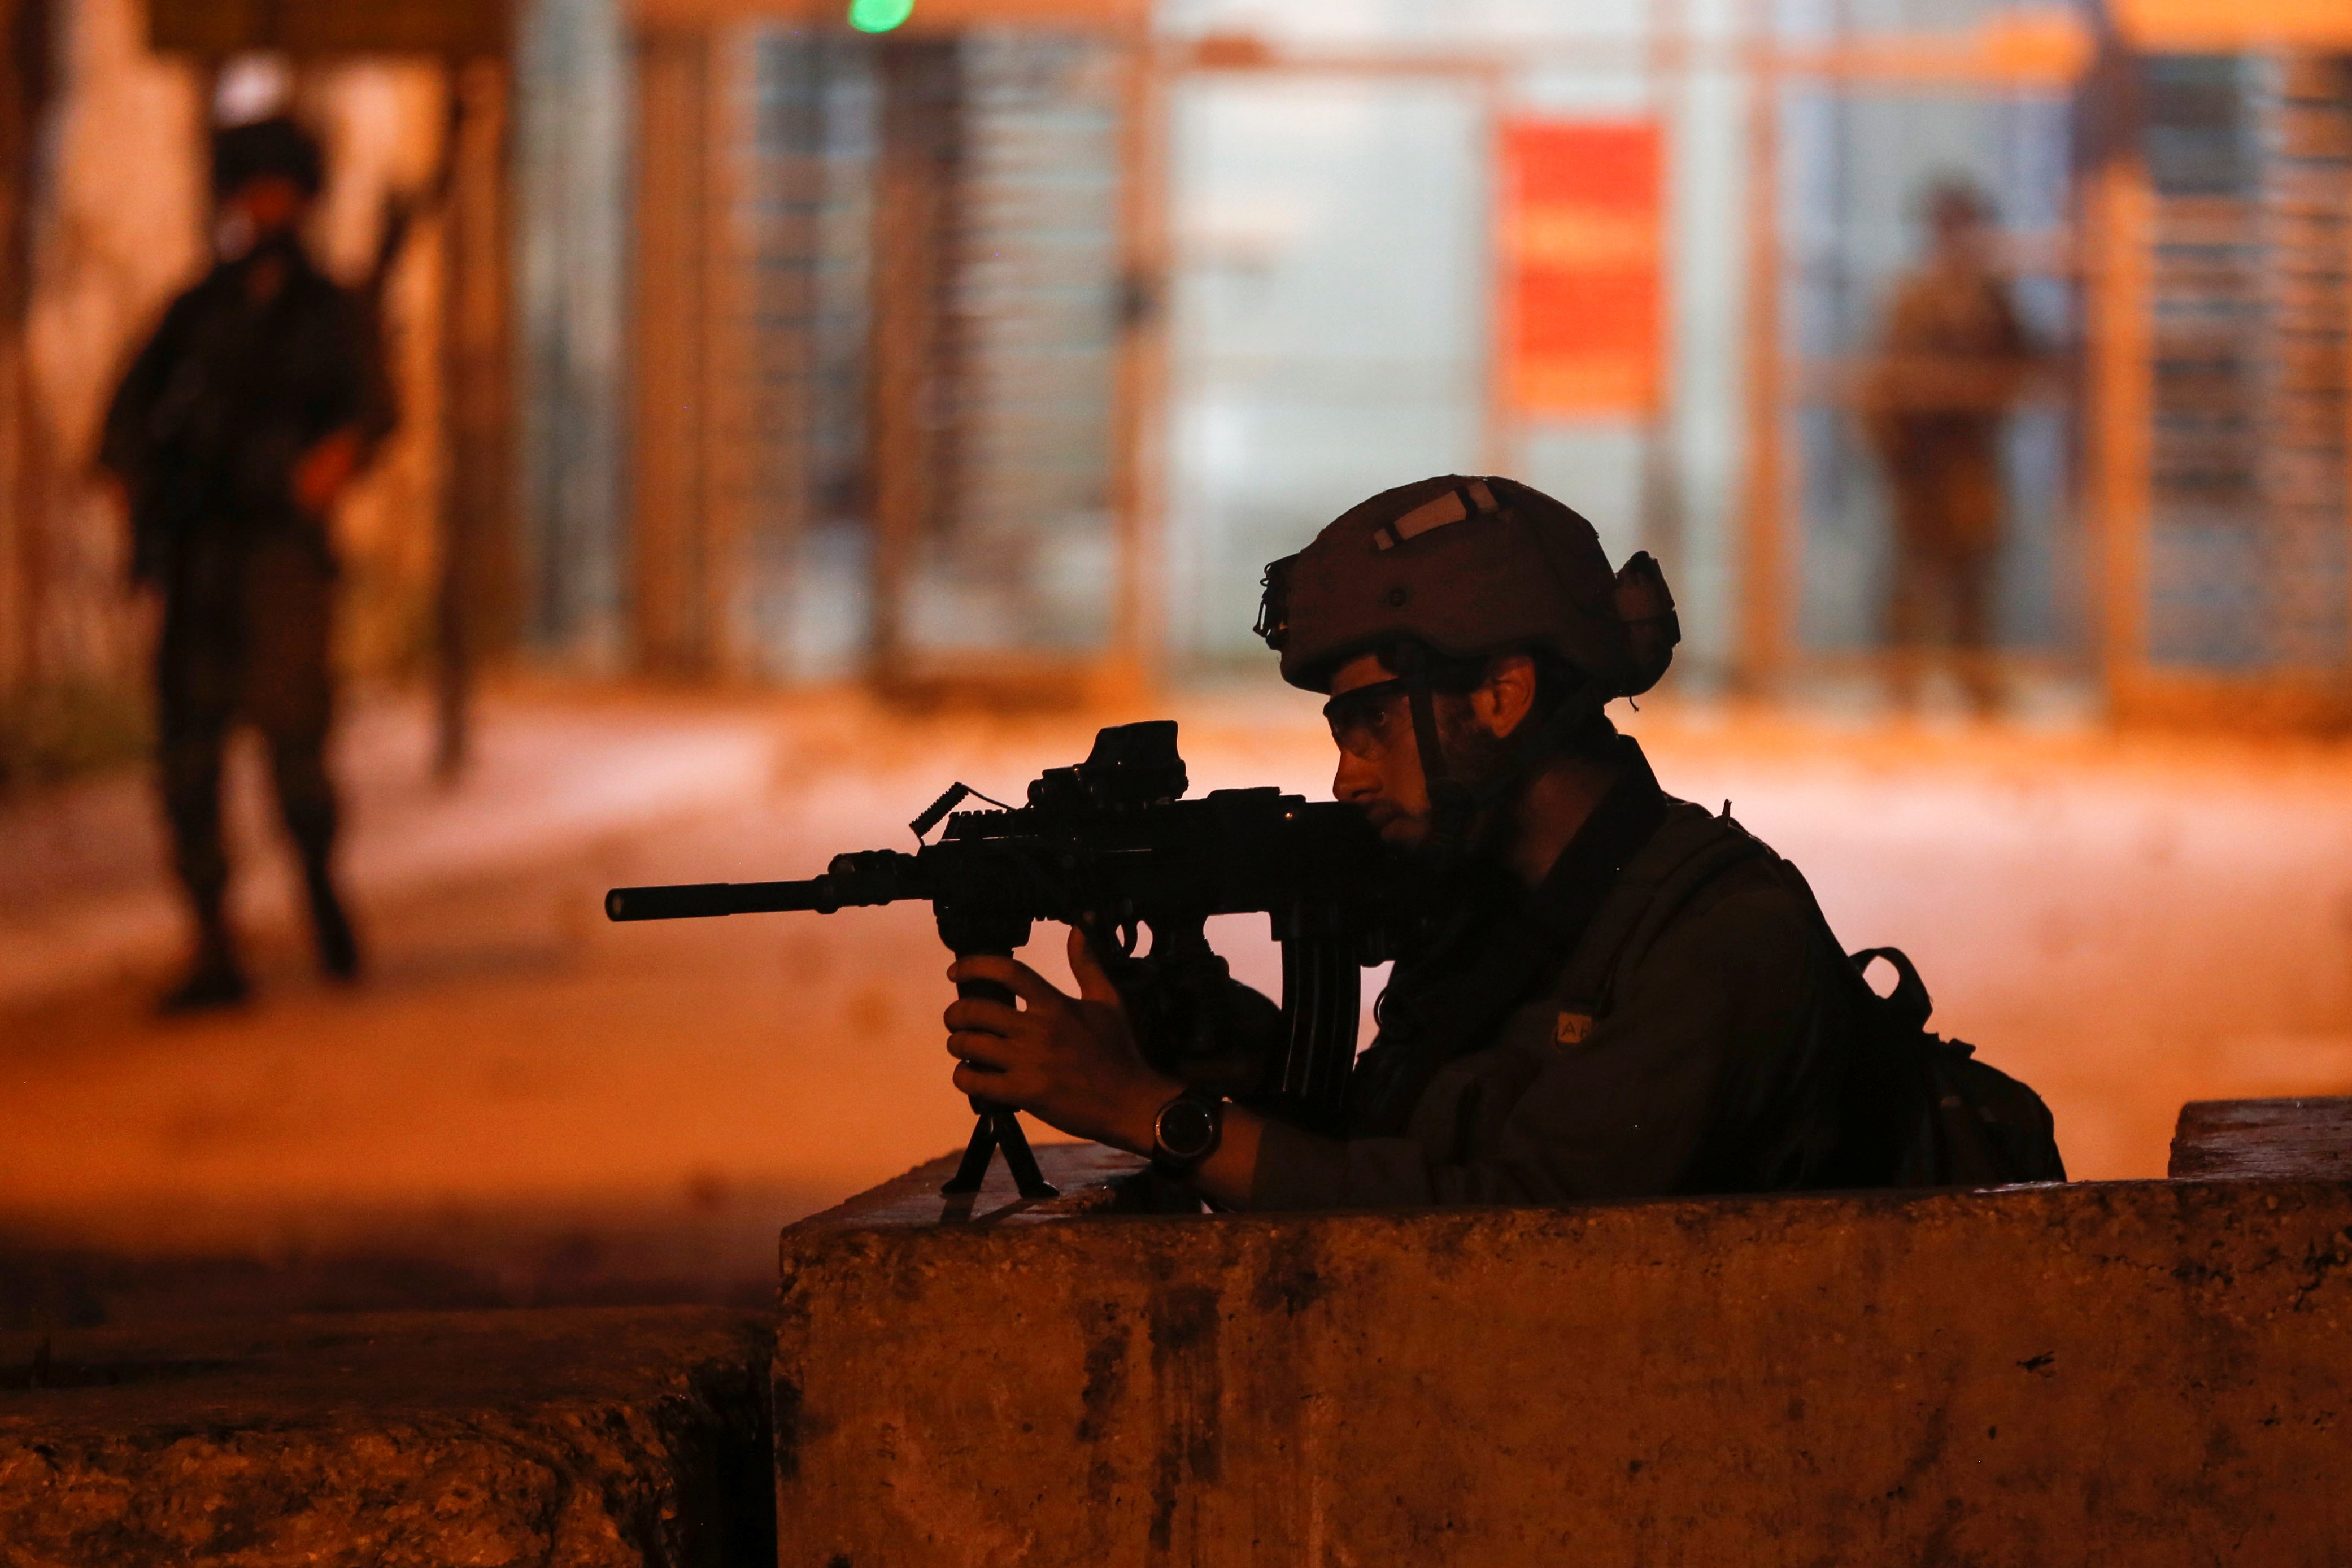  member of Israeli forces aims his weapon as Palestinians take part in an anti-Israel protest over tension in Jerusalem, in Hebron in the Israeli-occupied West Bank